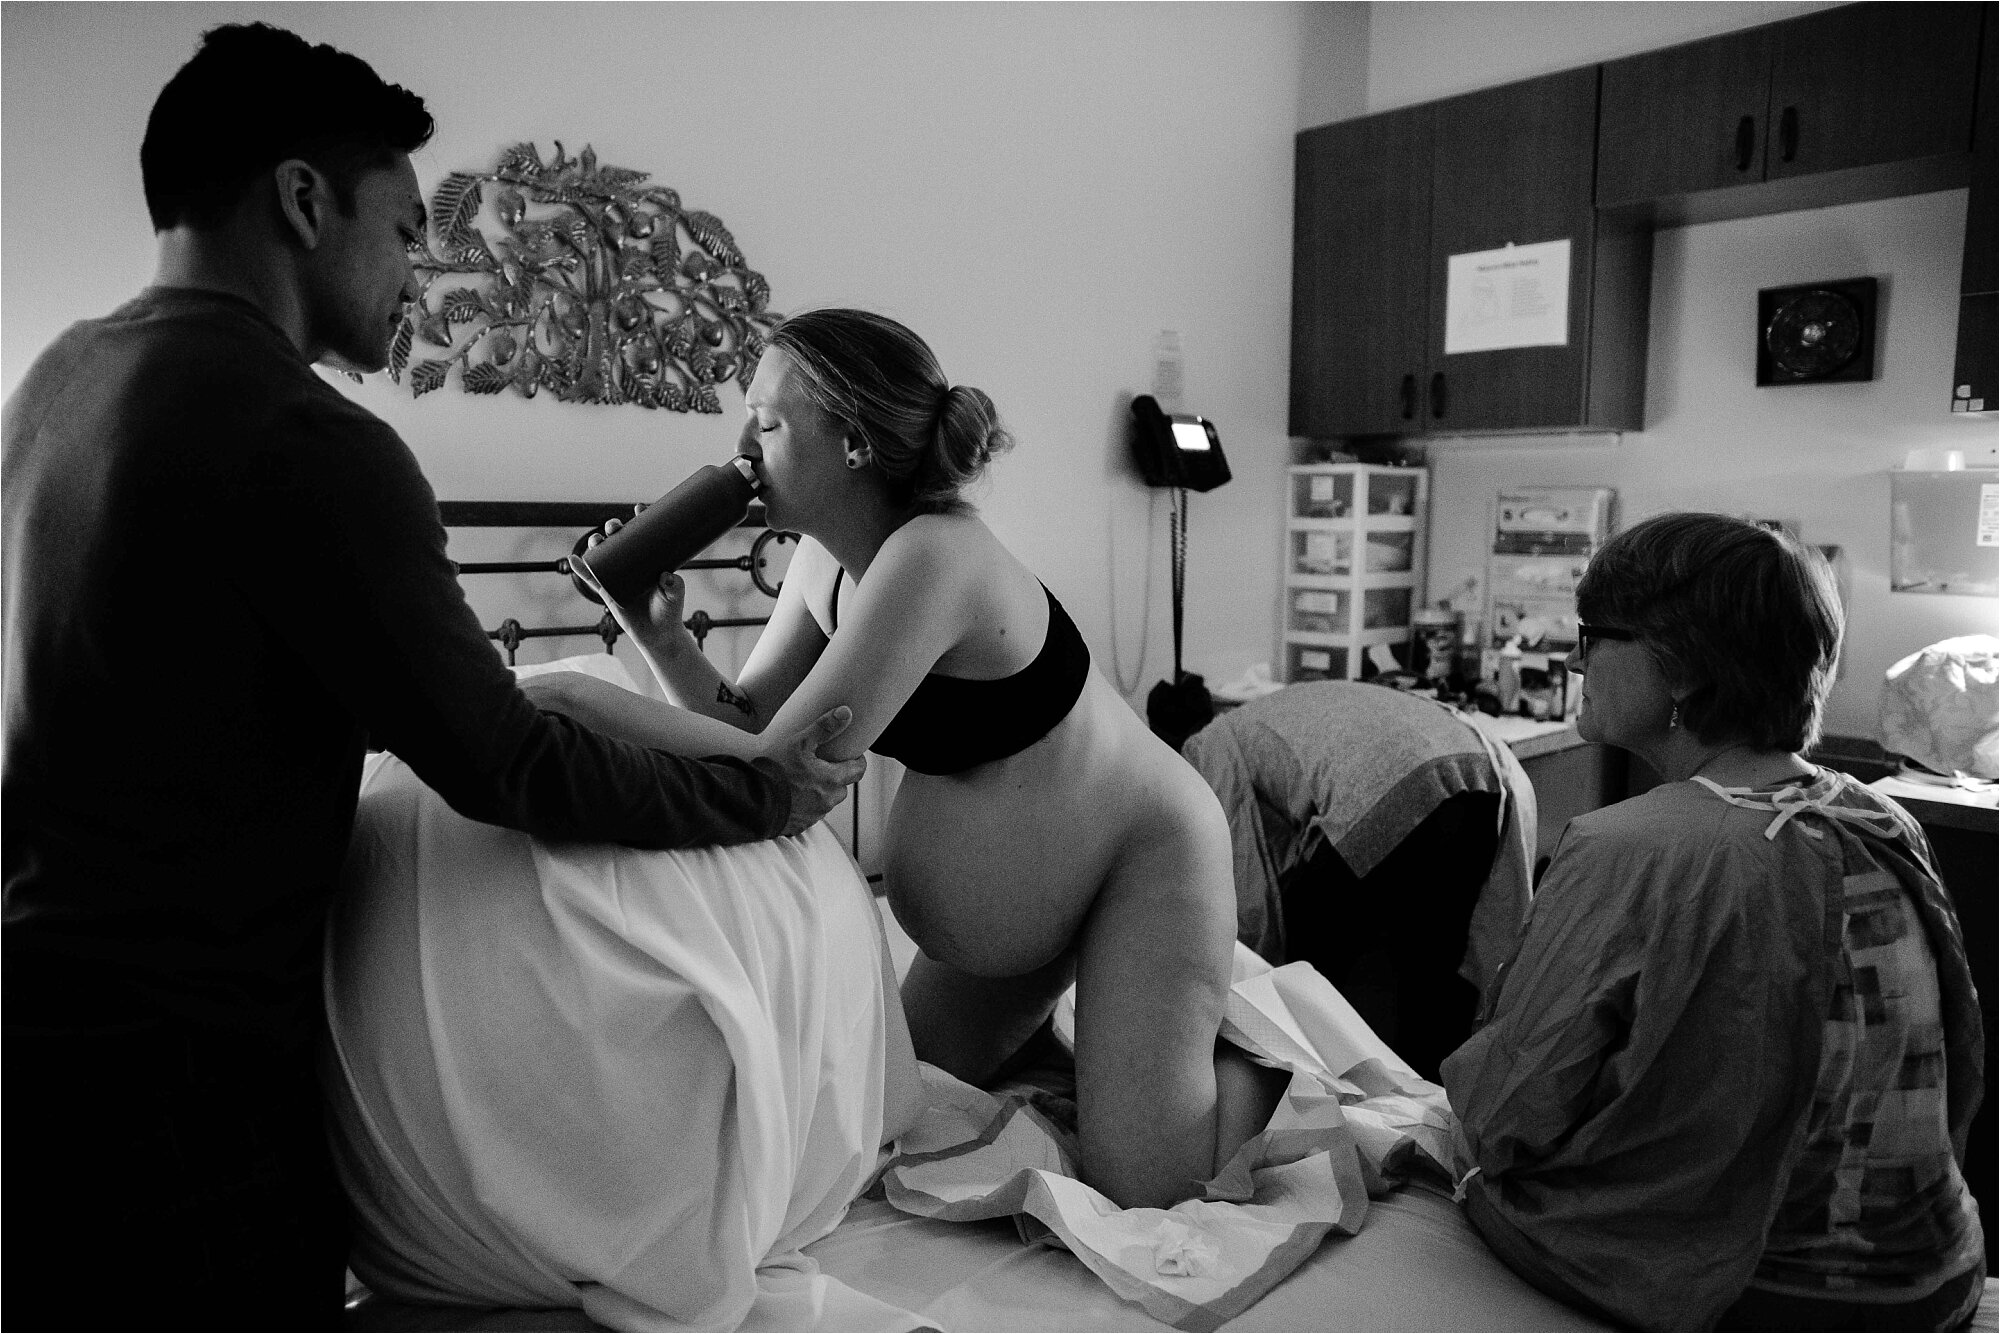 Pregnant mom drinks water in between contractions with husband's support, midwife and nurse prepare for delivery, Philadelphia birth center photography